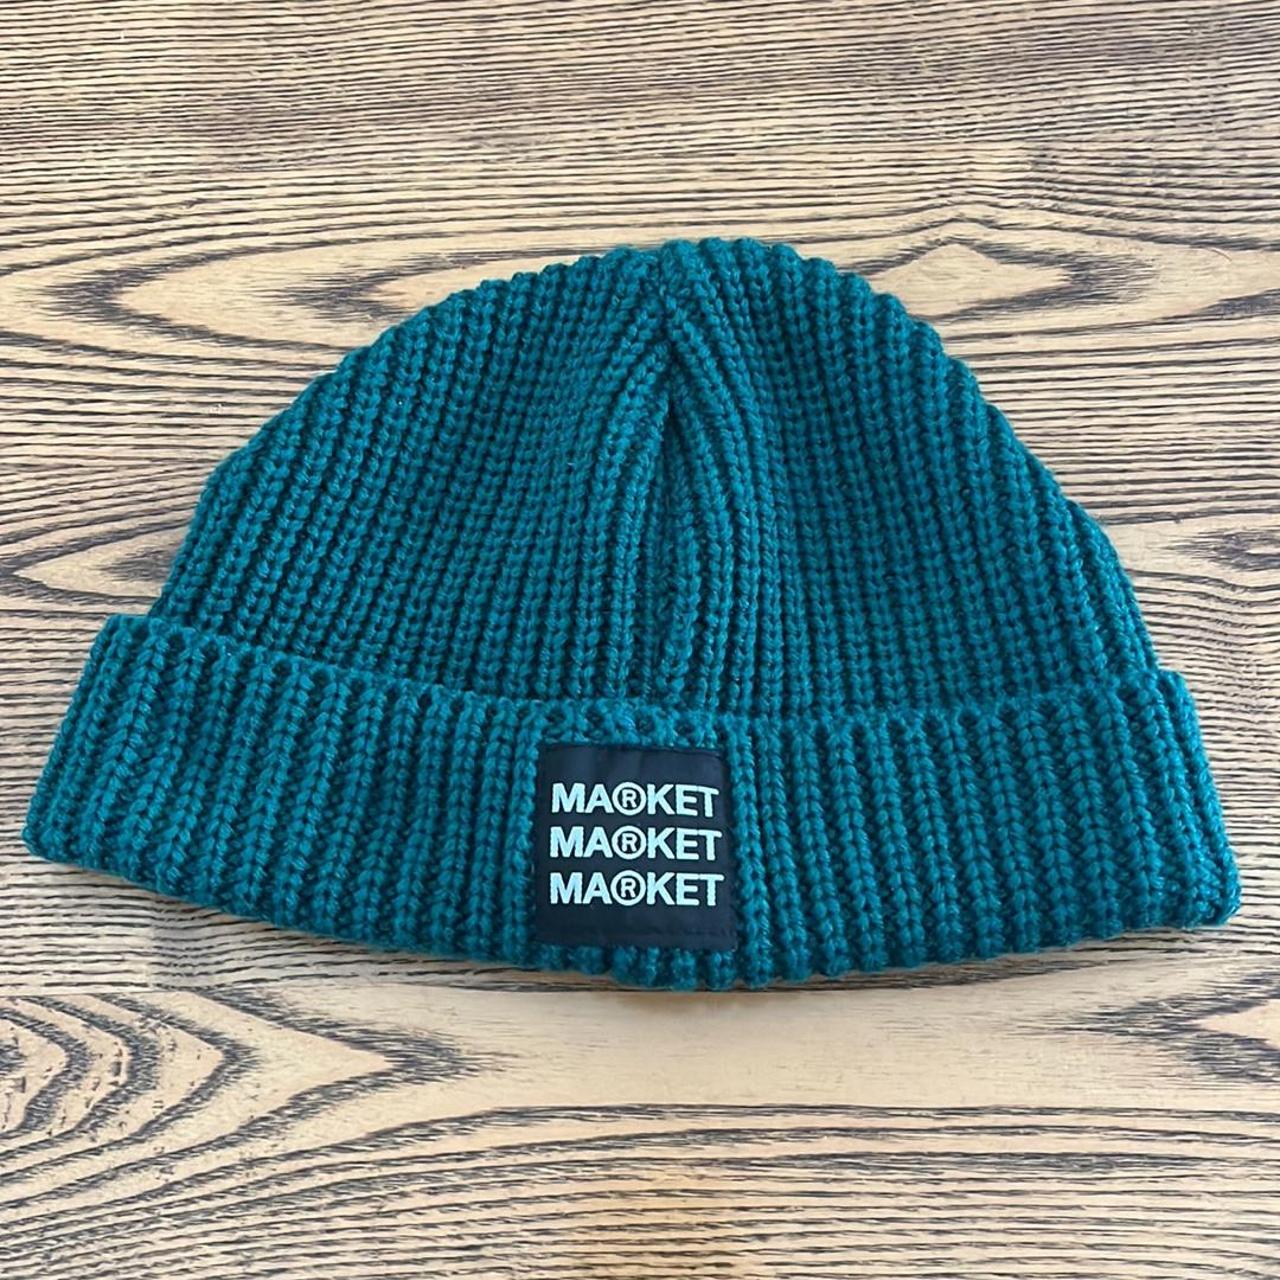 Market Men's Green and Yellow Hat (2)